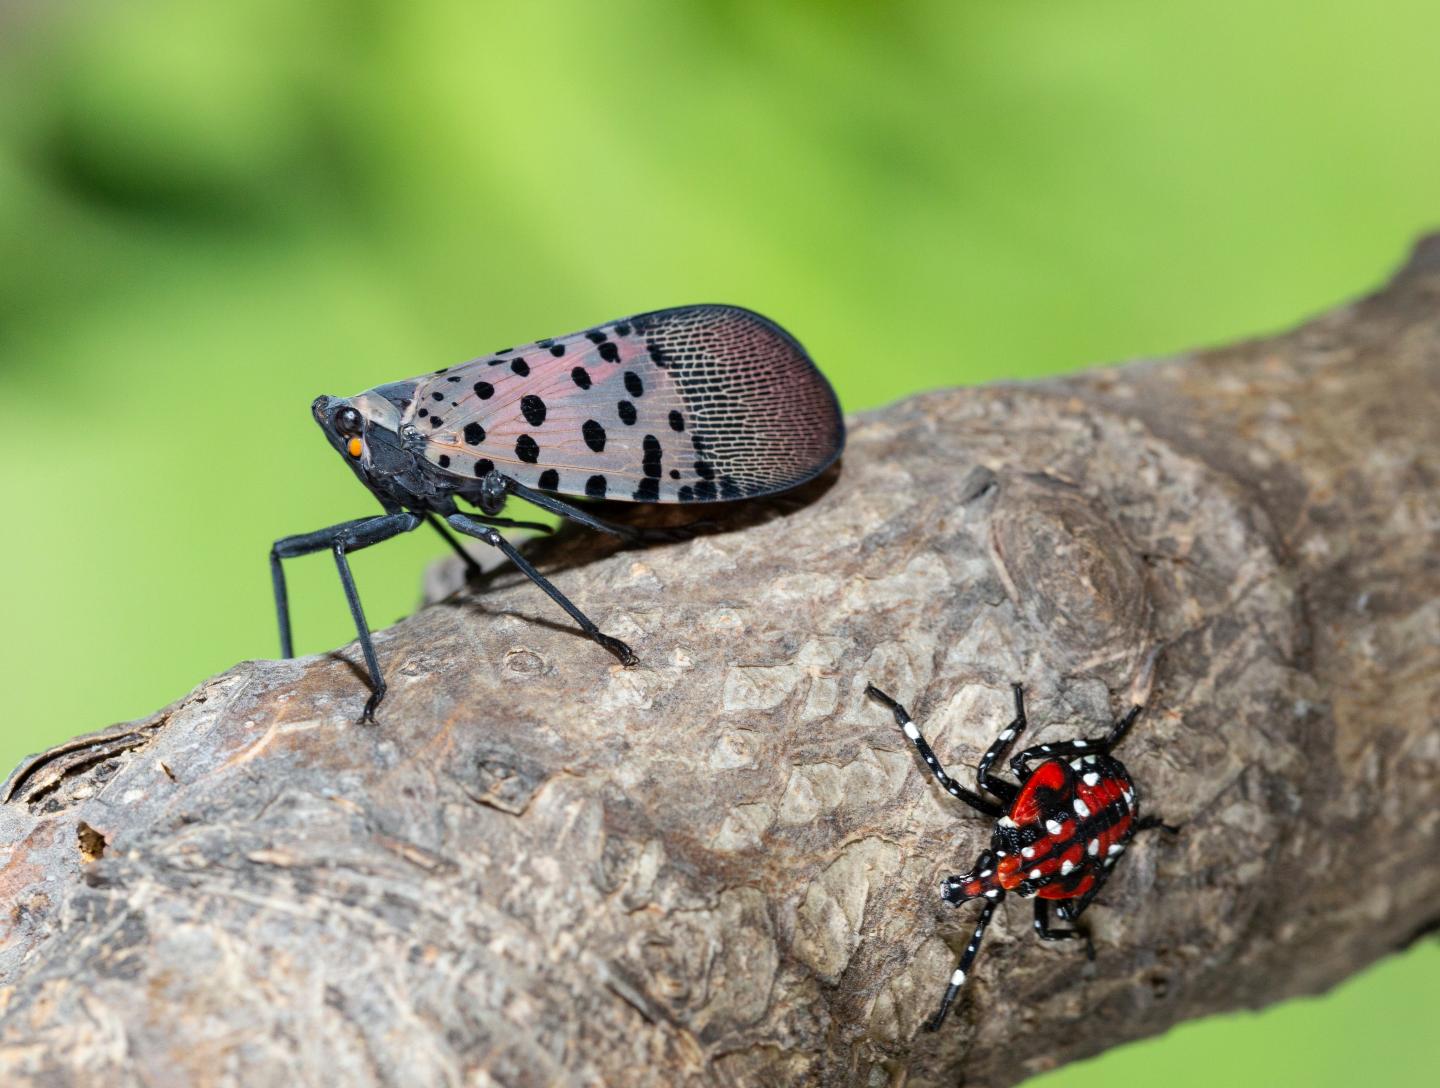 Spotted lanternfly adult and nymph